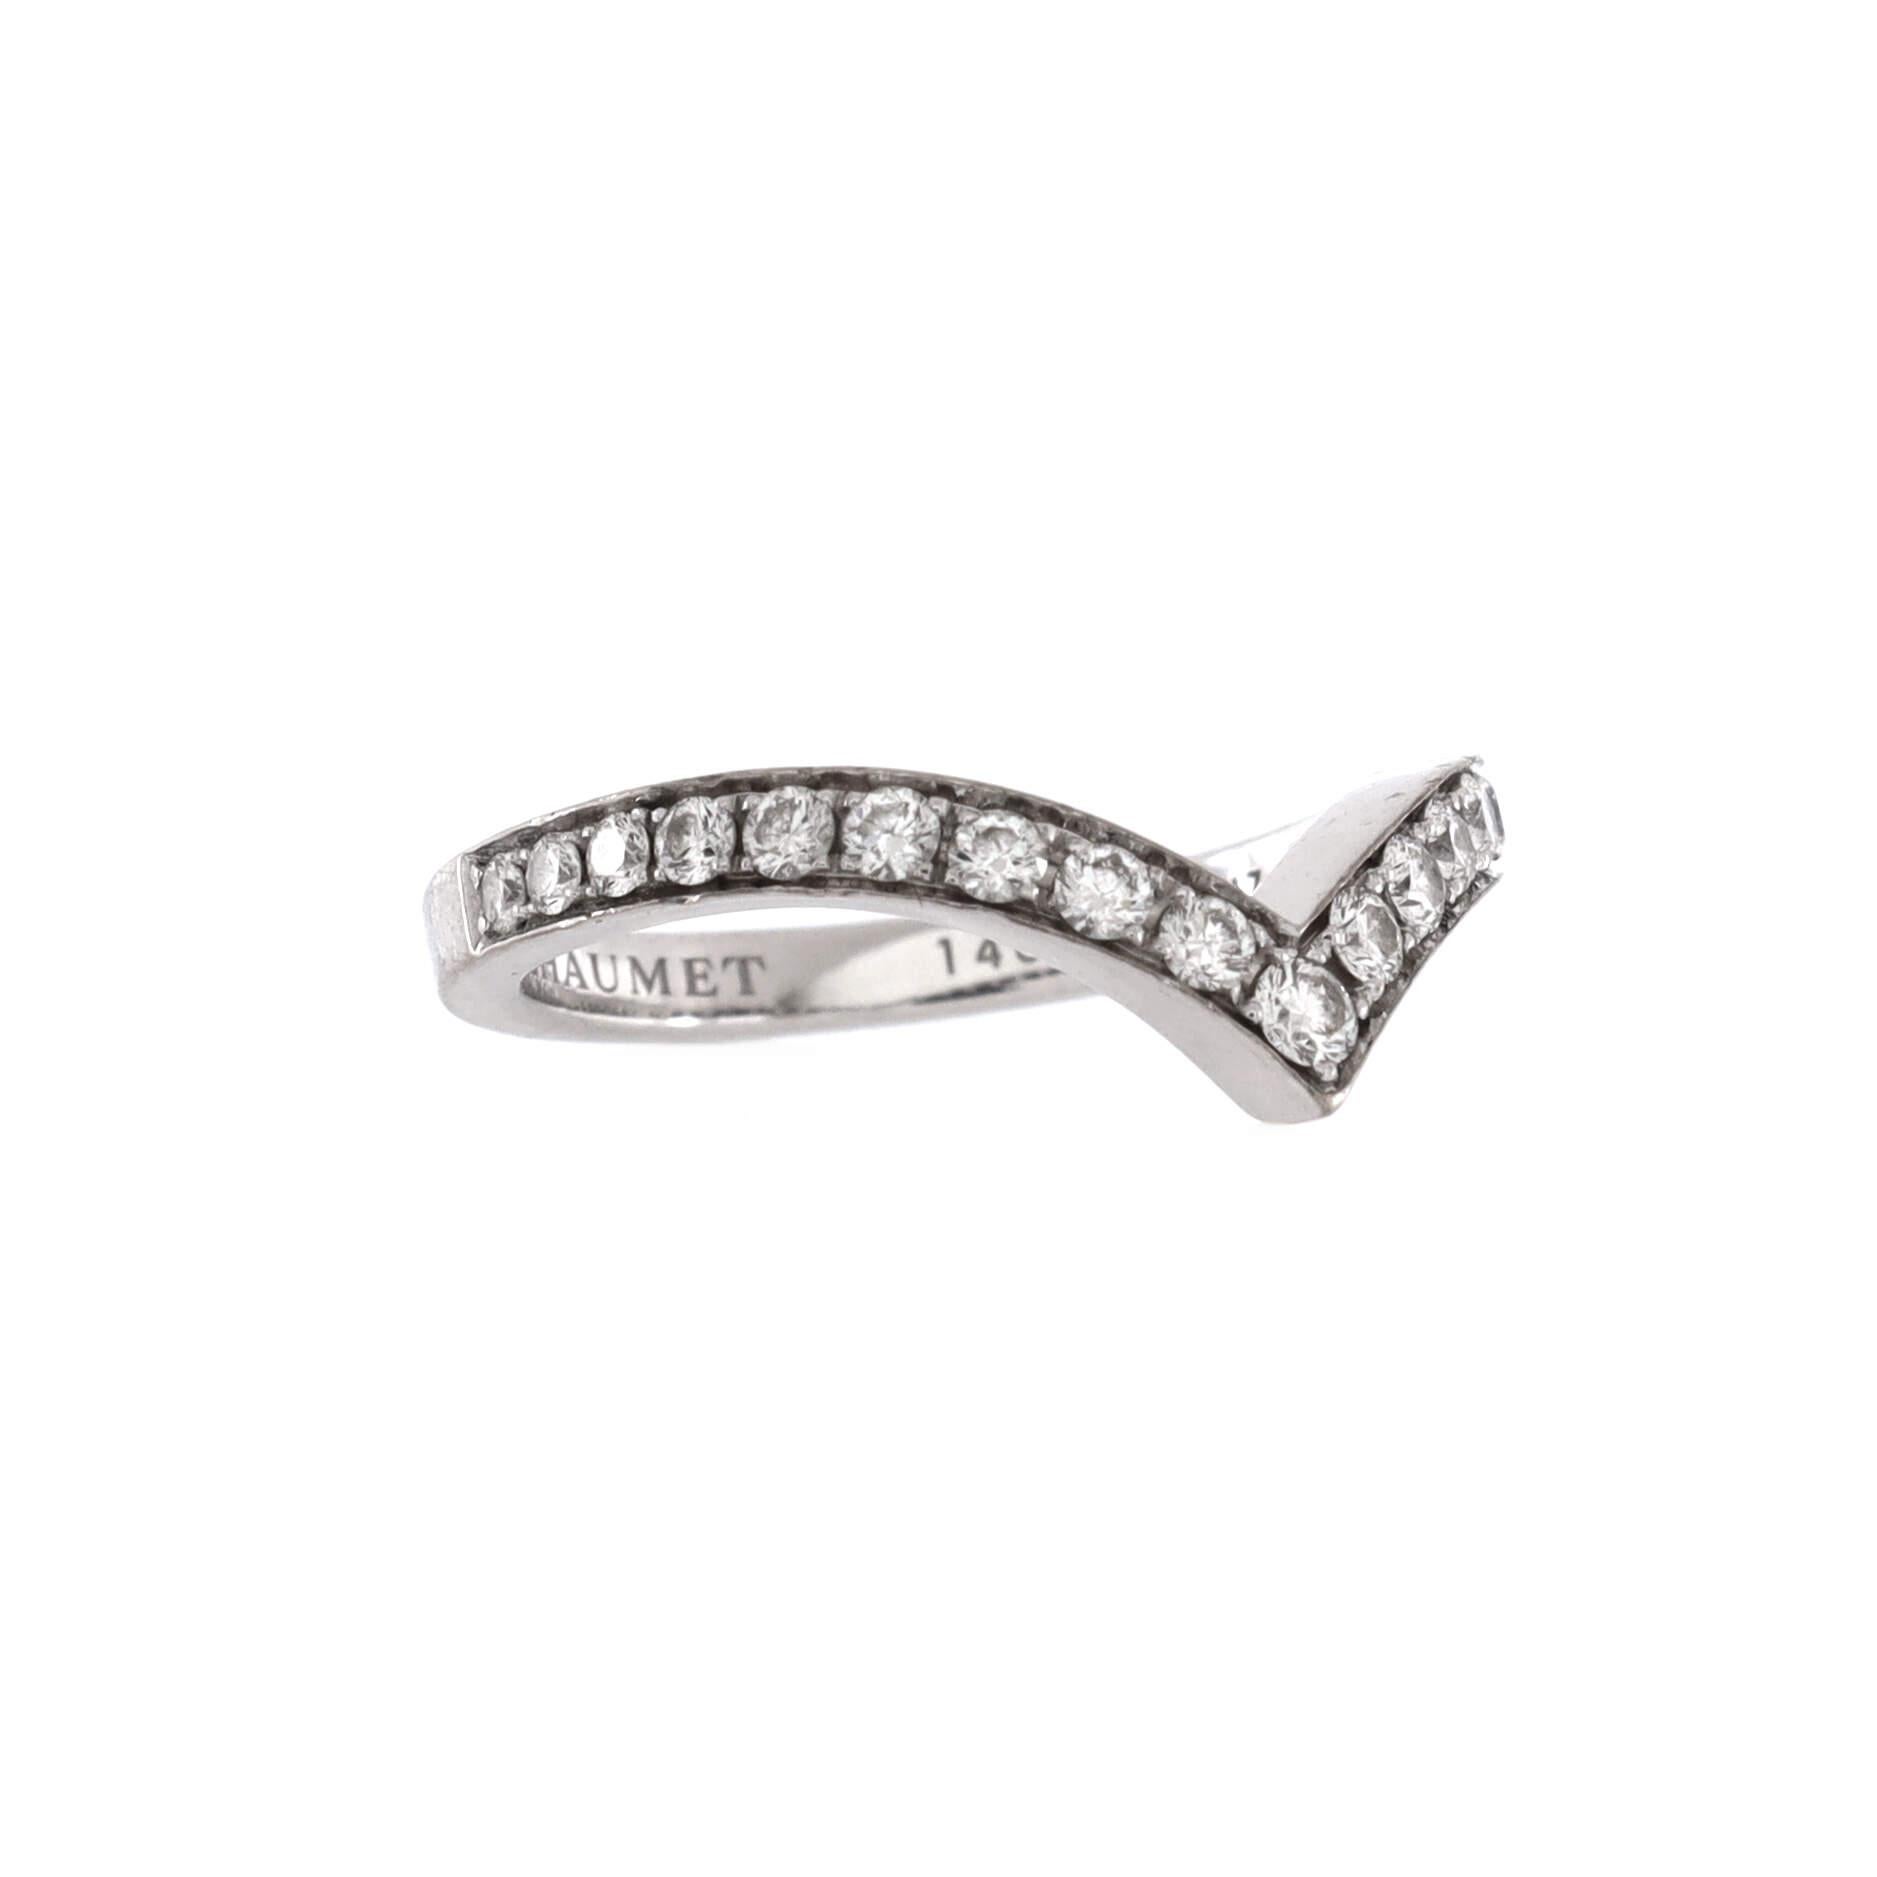 Condition: Fair. Heavy wear with deep scratches.
Accessories: No Accessories
Measurements: Size: 4 - 47, Width: 1.90 mm
Designer: Chaumet
Model: Josephine Aigrette Ring 18K White Gold and Pave Diamonds
Exterior Color: Silver
Item Number: 206918/1